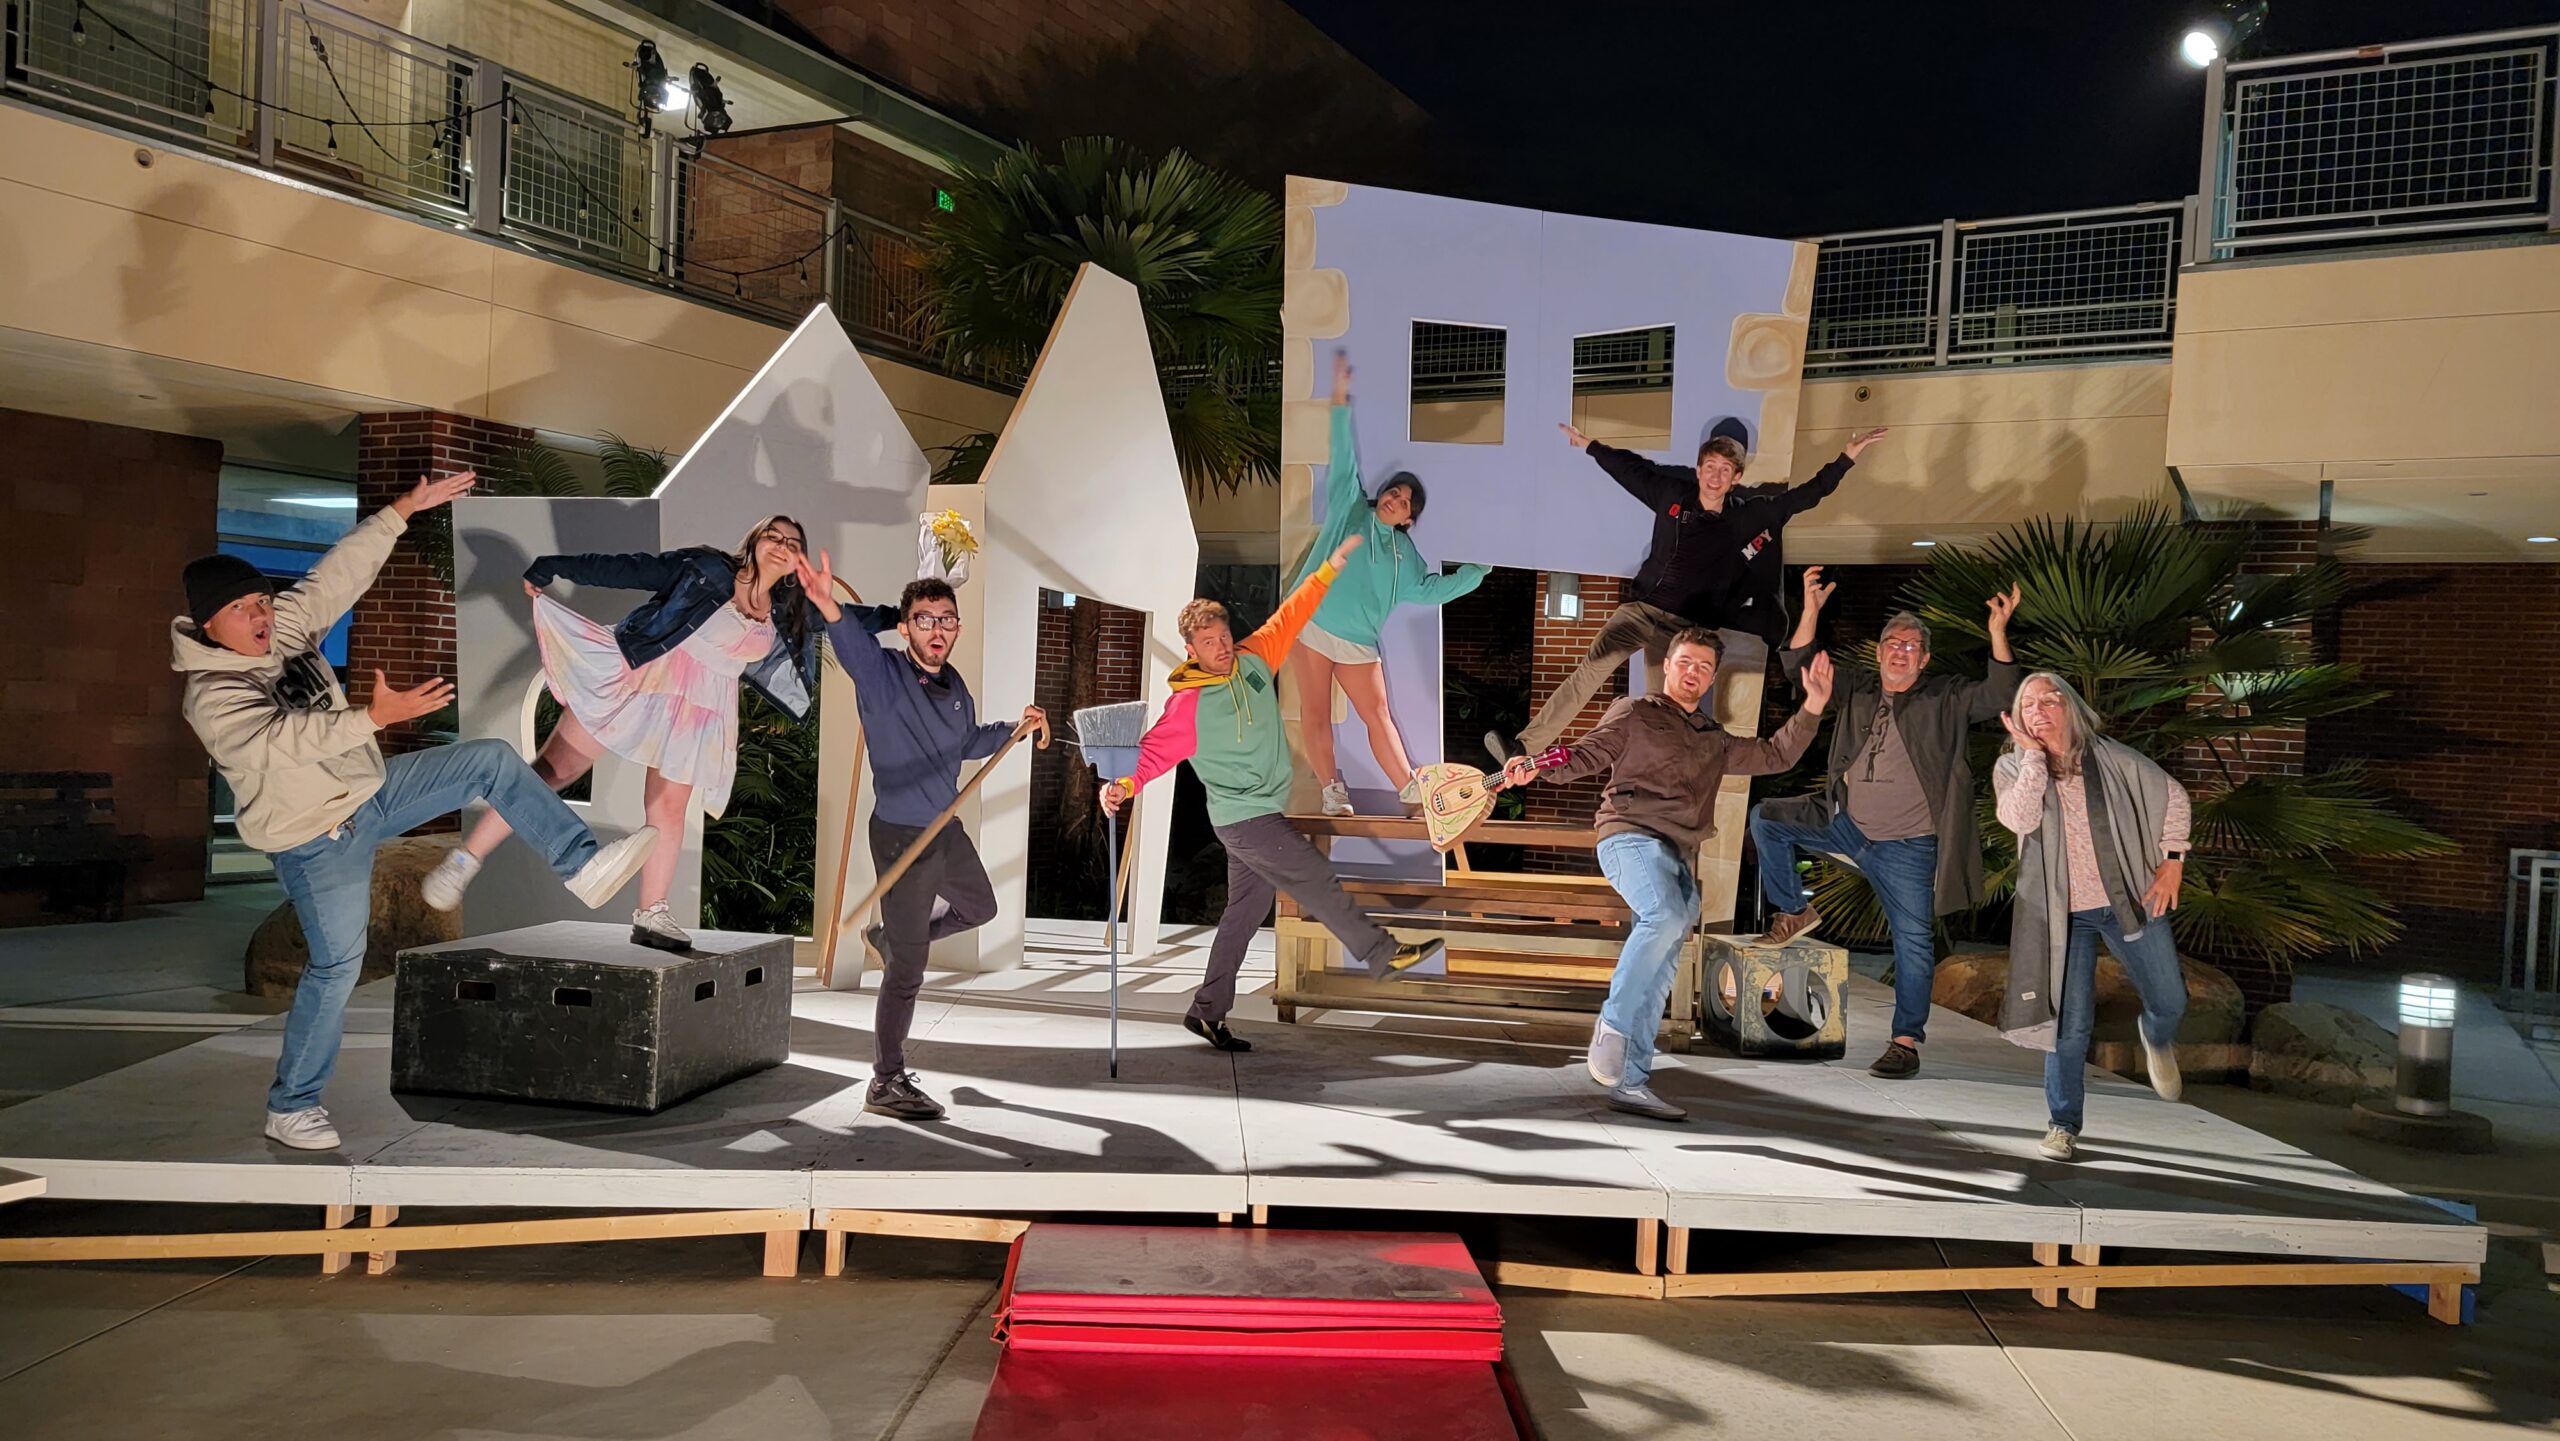 A group of actors pose on stage at a small plaza with a second-story building behind them on the left and an overhead walkway in the middle and right.